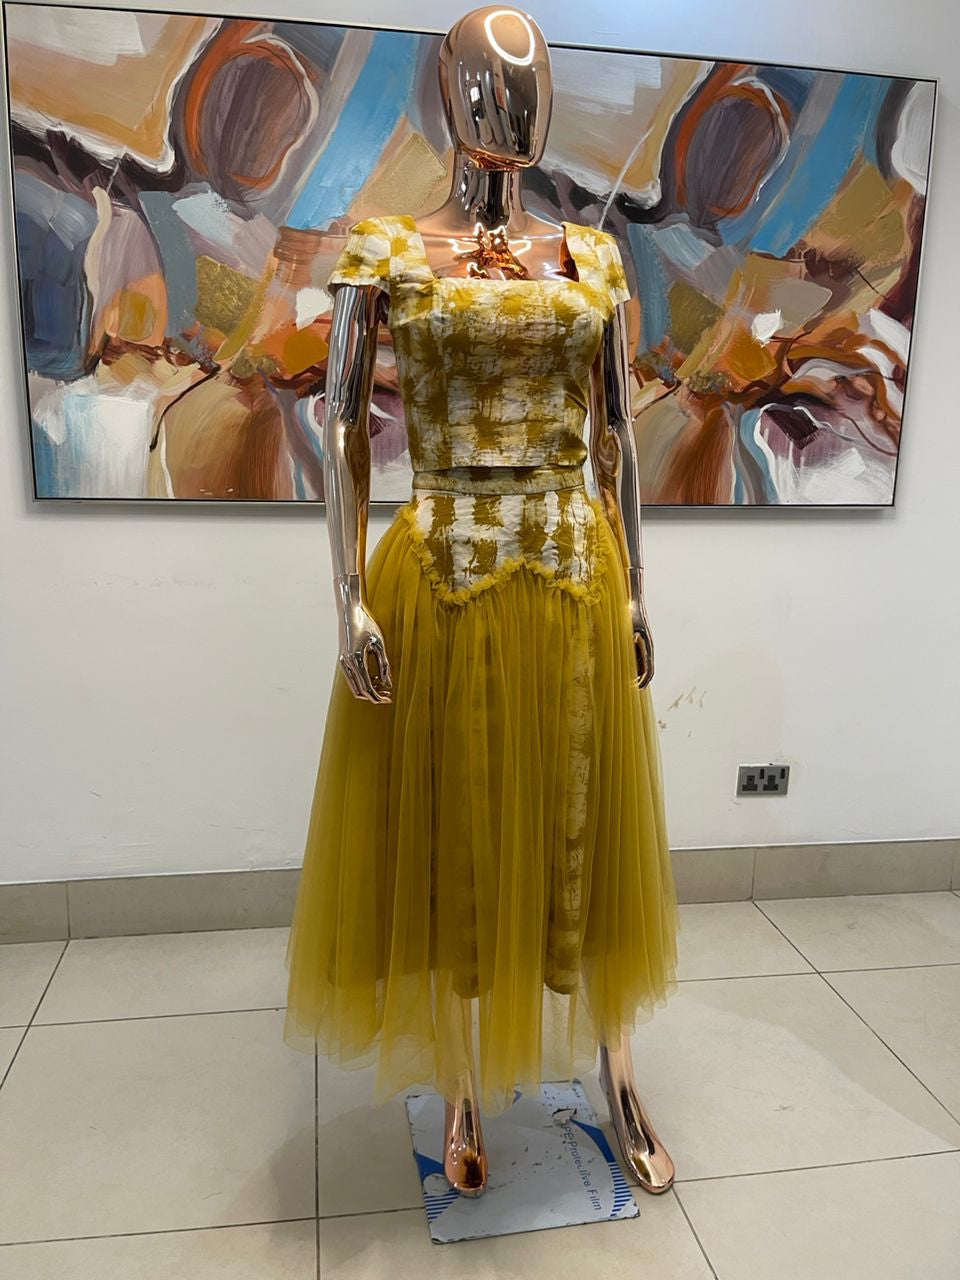 Sheila Bonsu Atelier: Exquisite Ghanaian Batik and Tulle Skirts and Sets